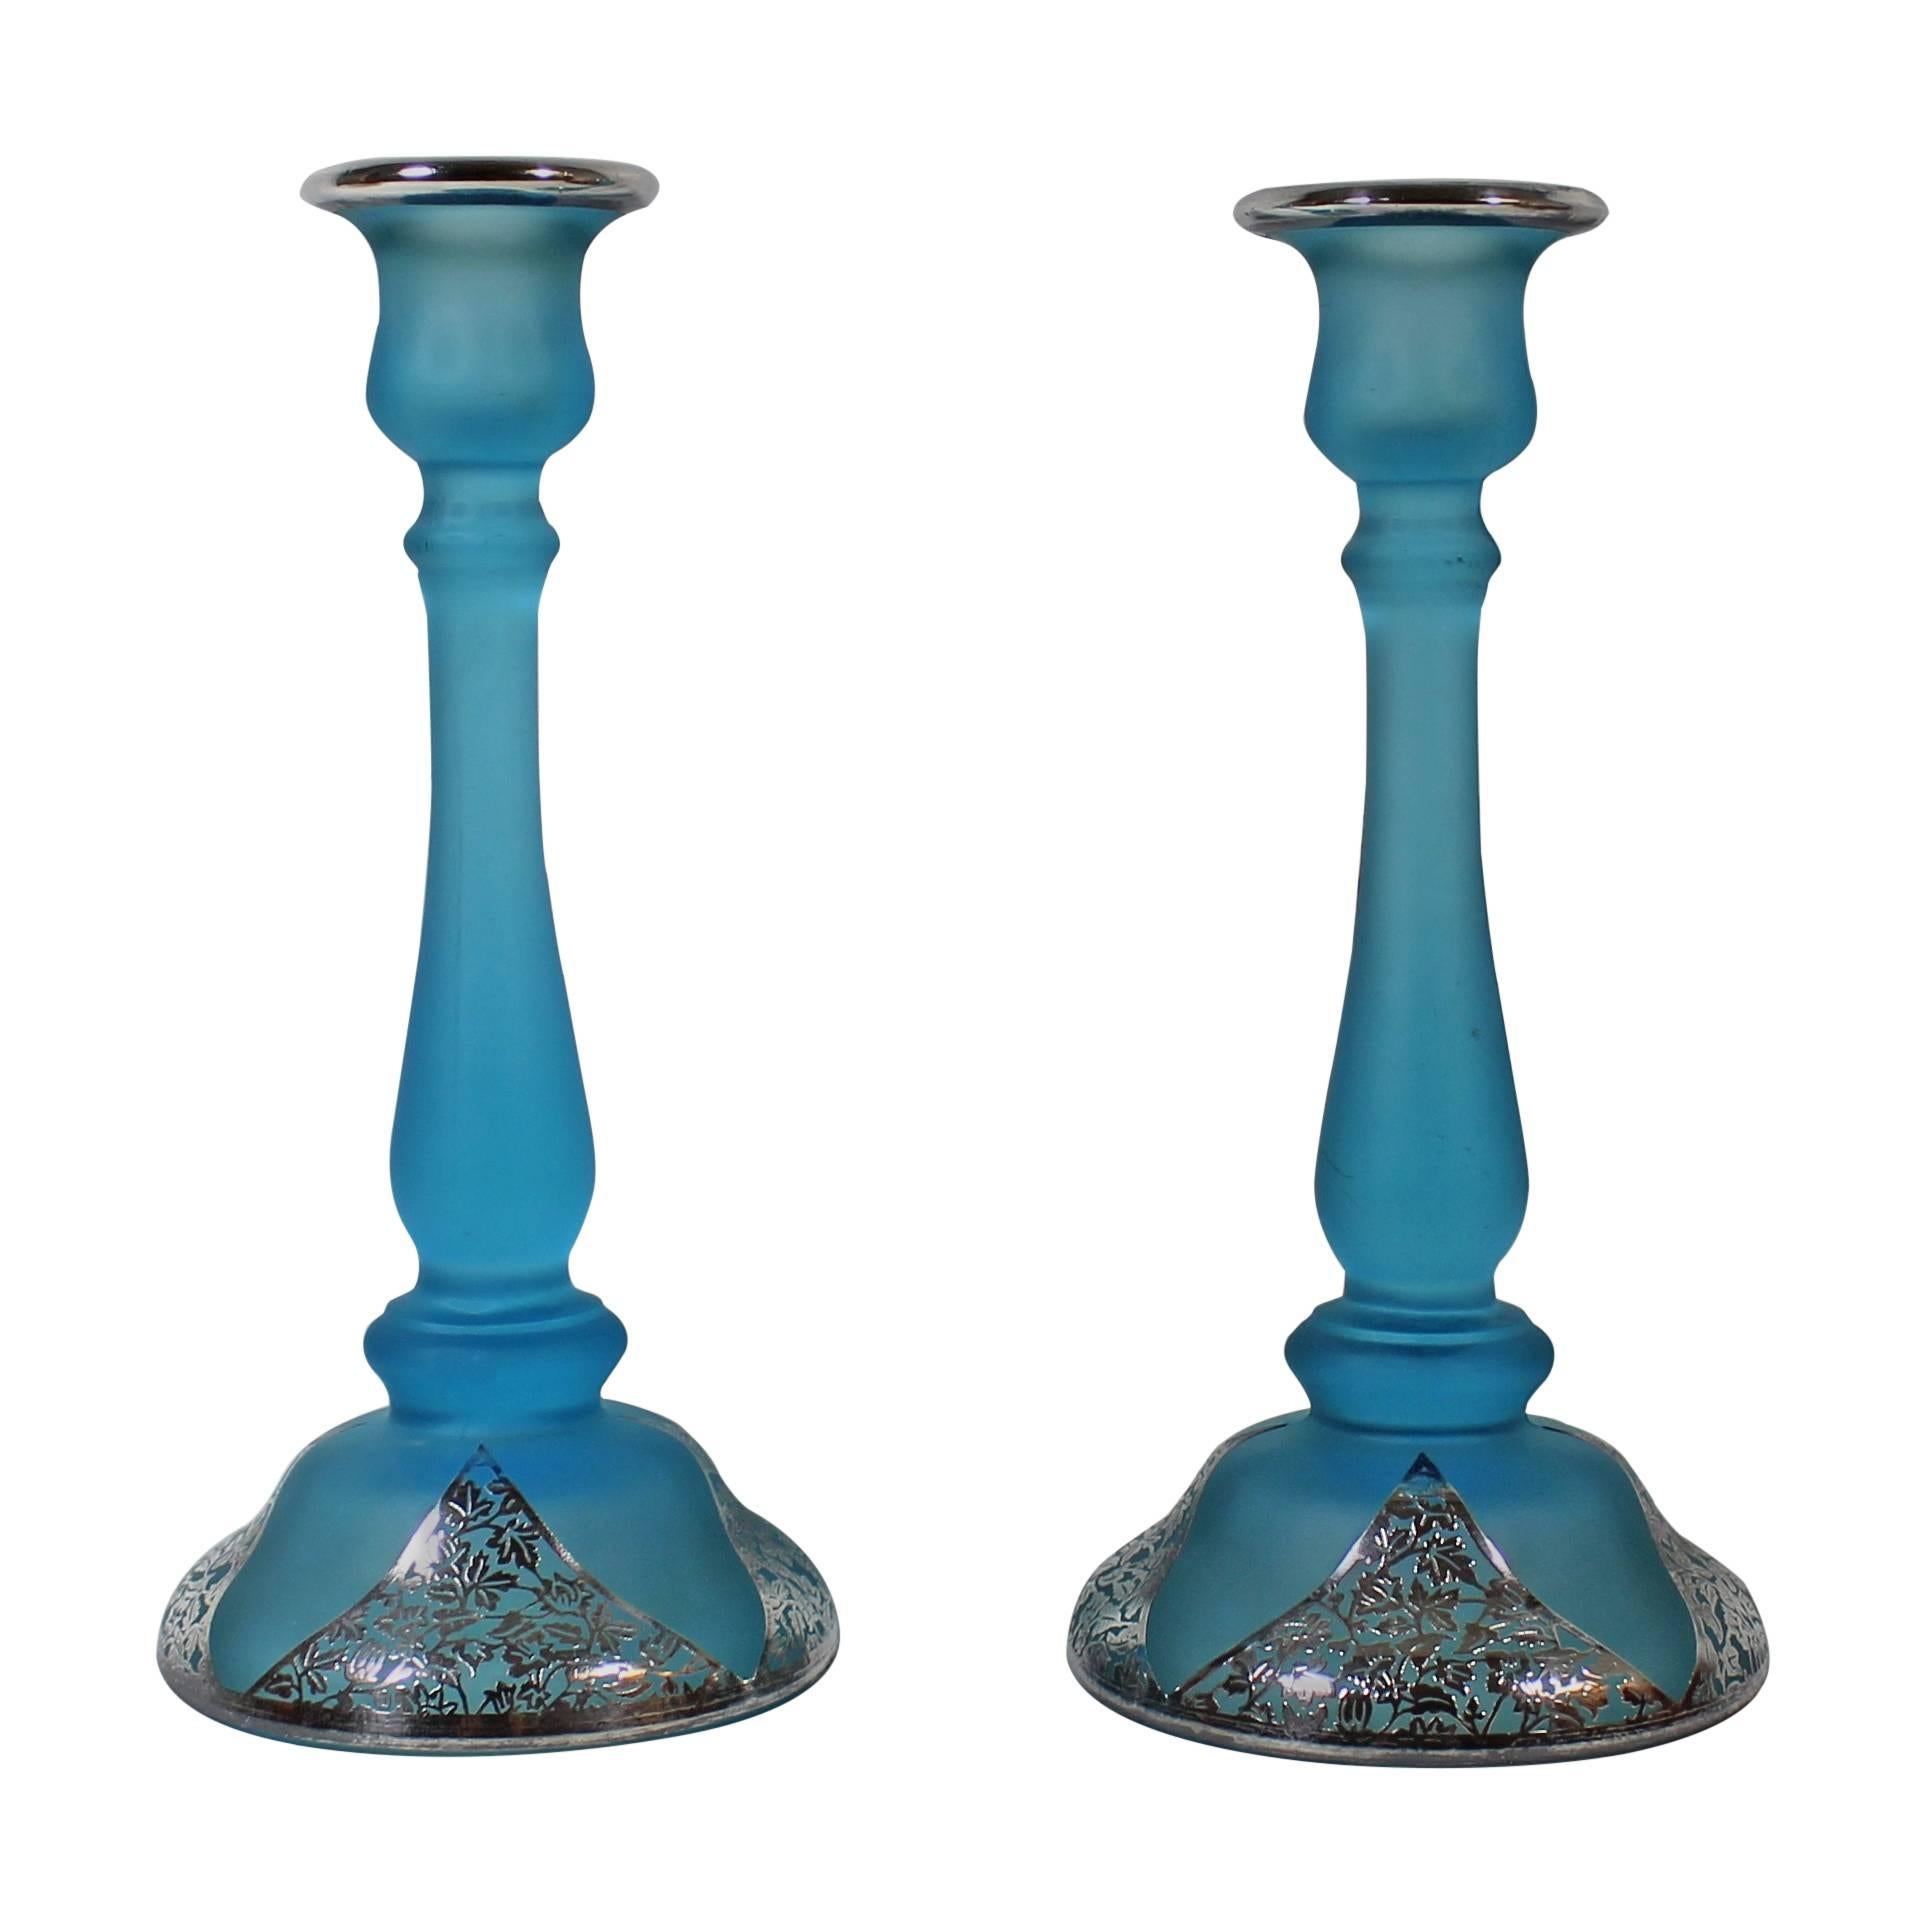 Pair of Art Nouveau Electric Blue Candlesticks with Silver Overlay